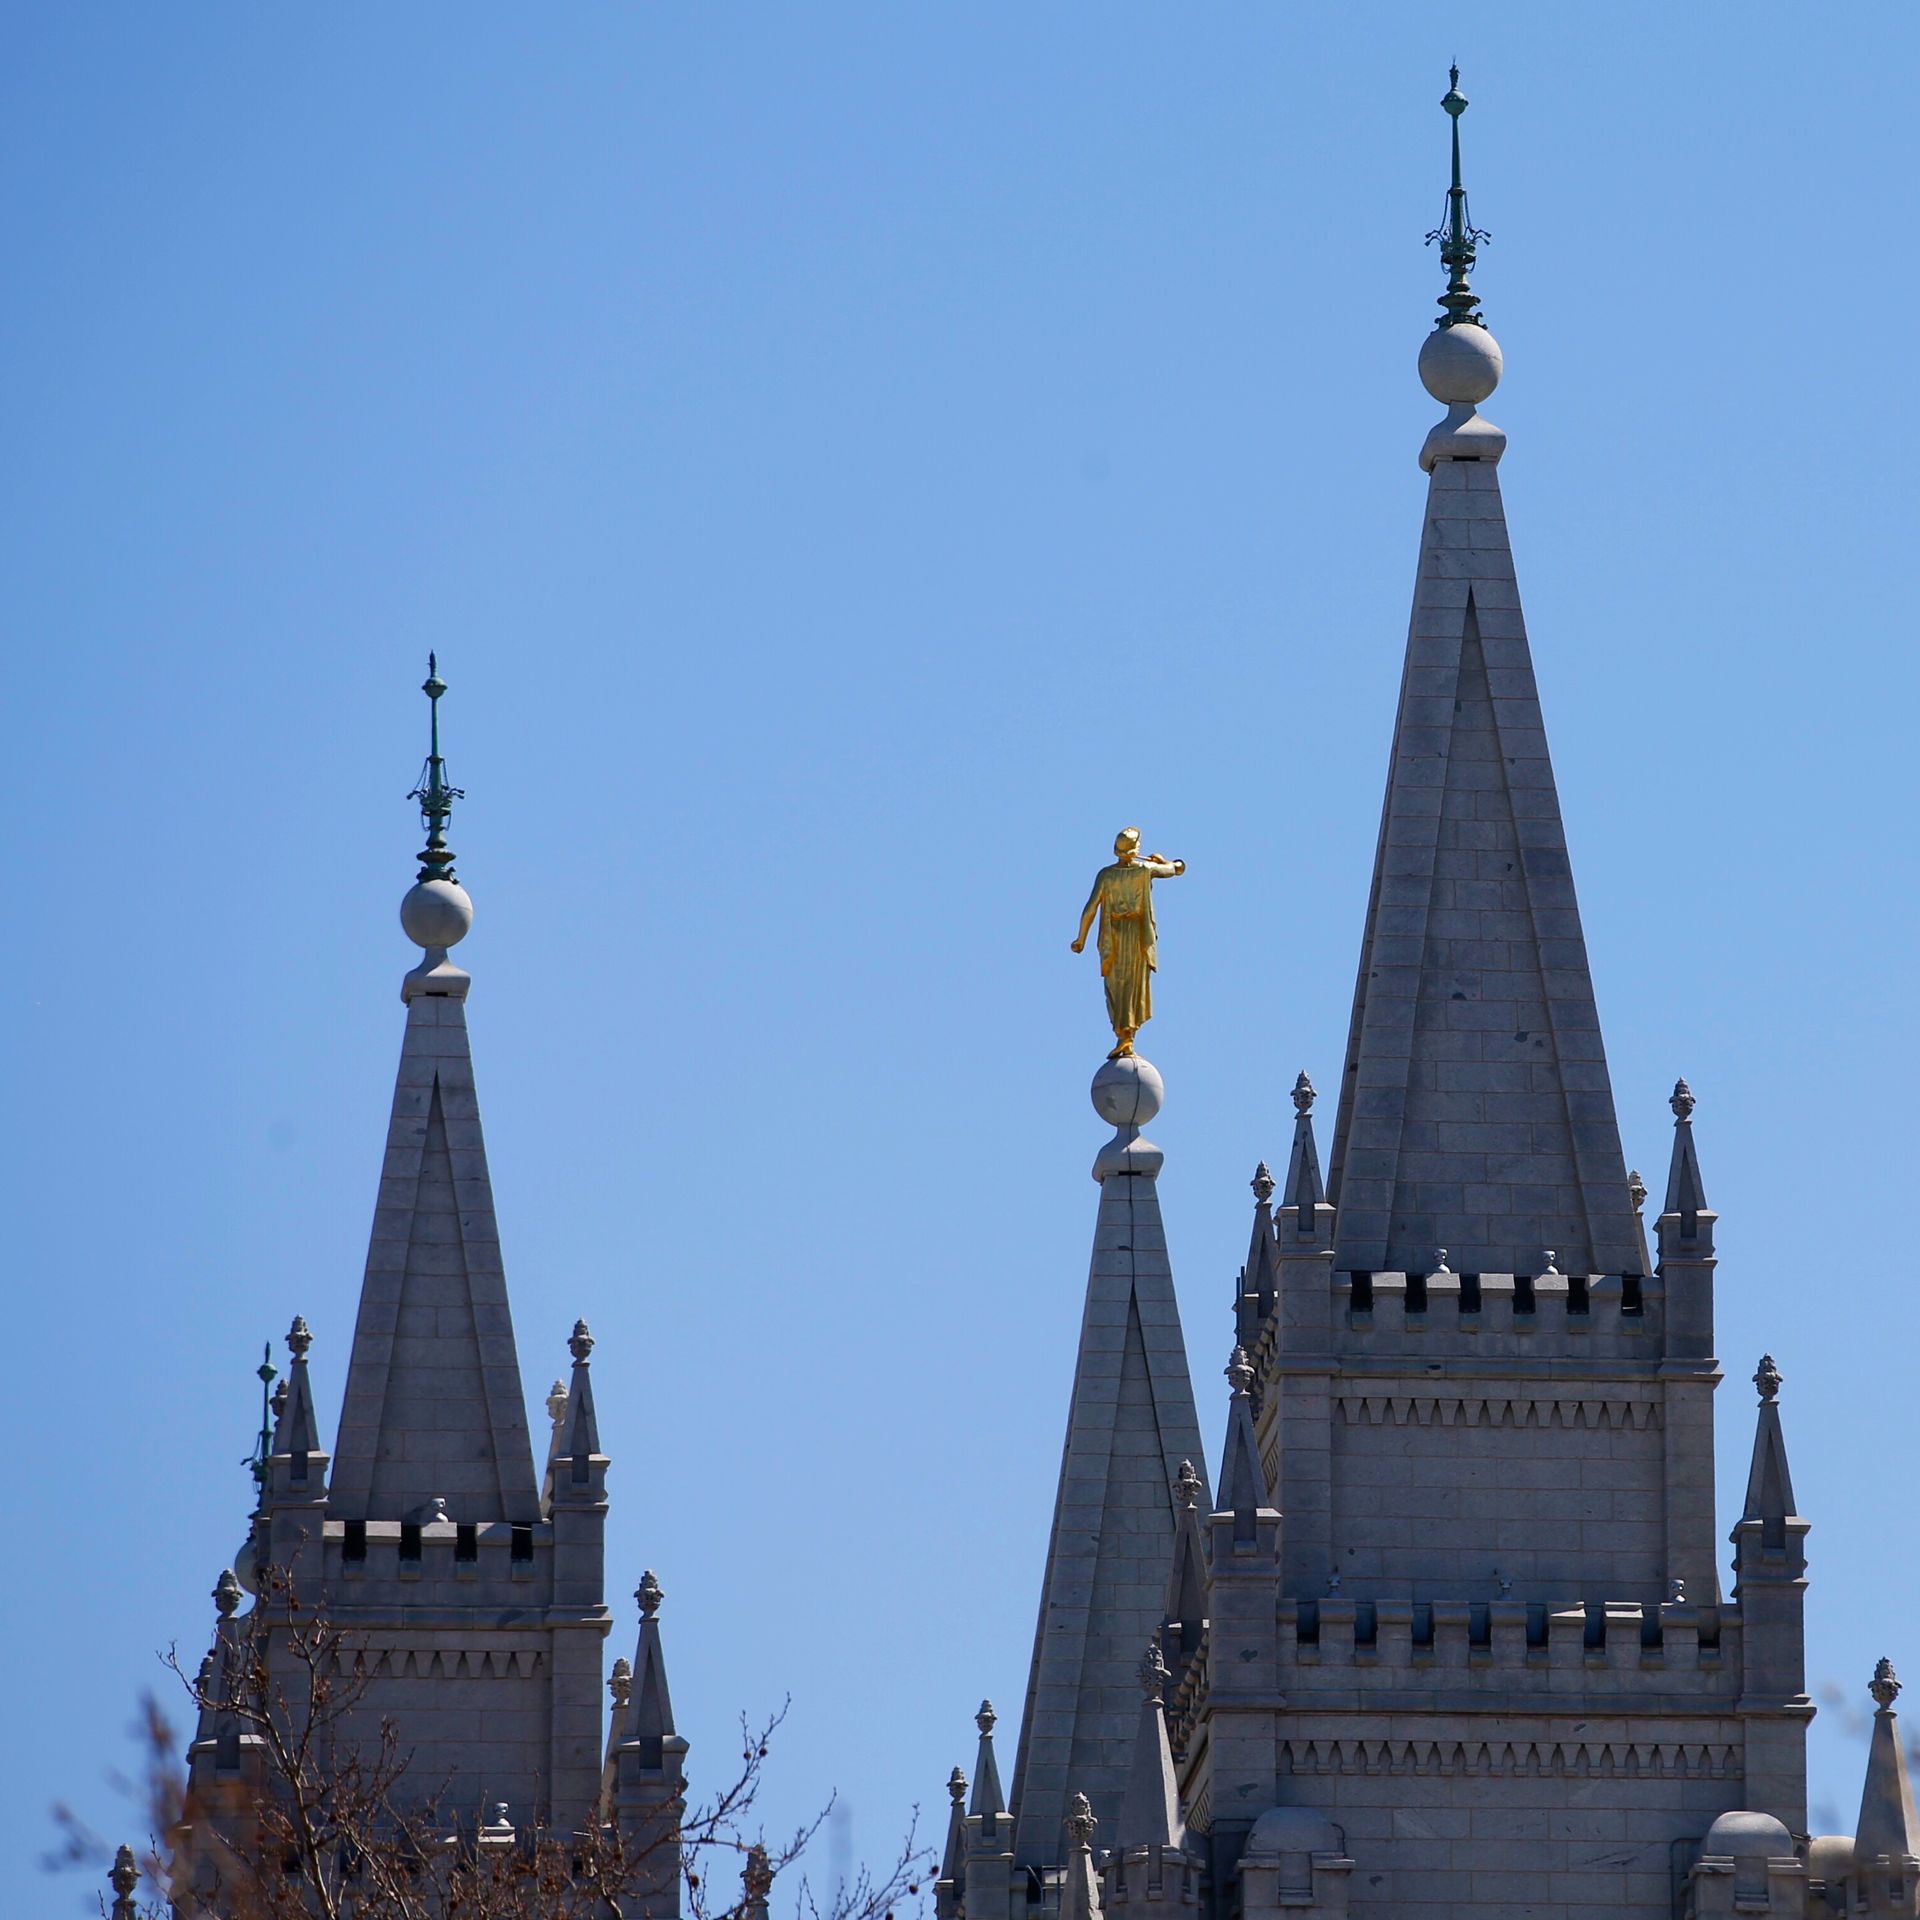 The steeples at the Salt Lake City temple appear before a blue sky.